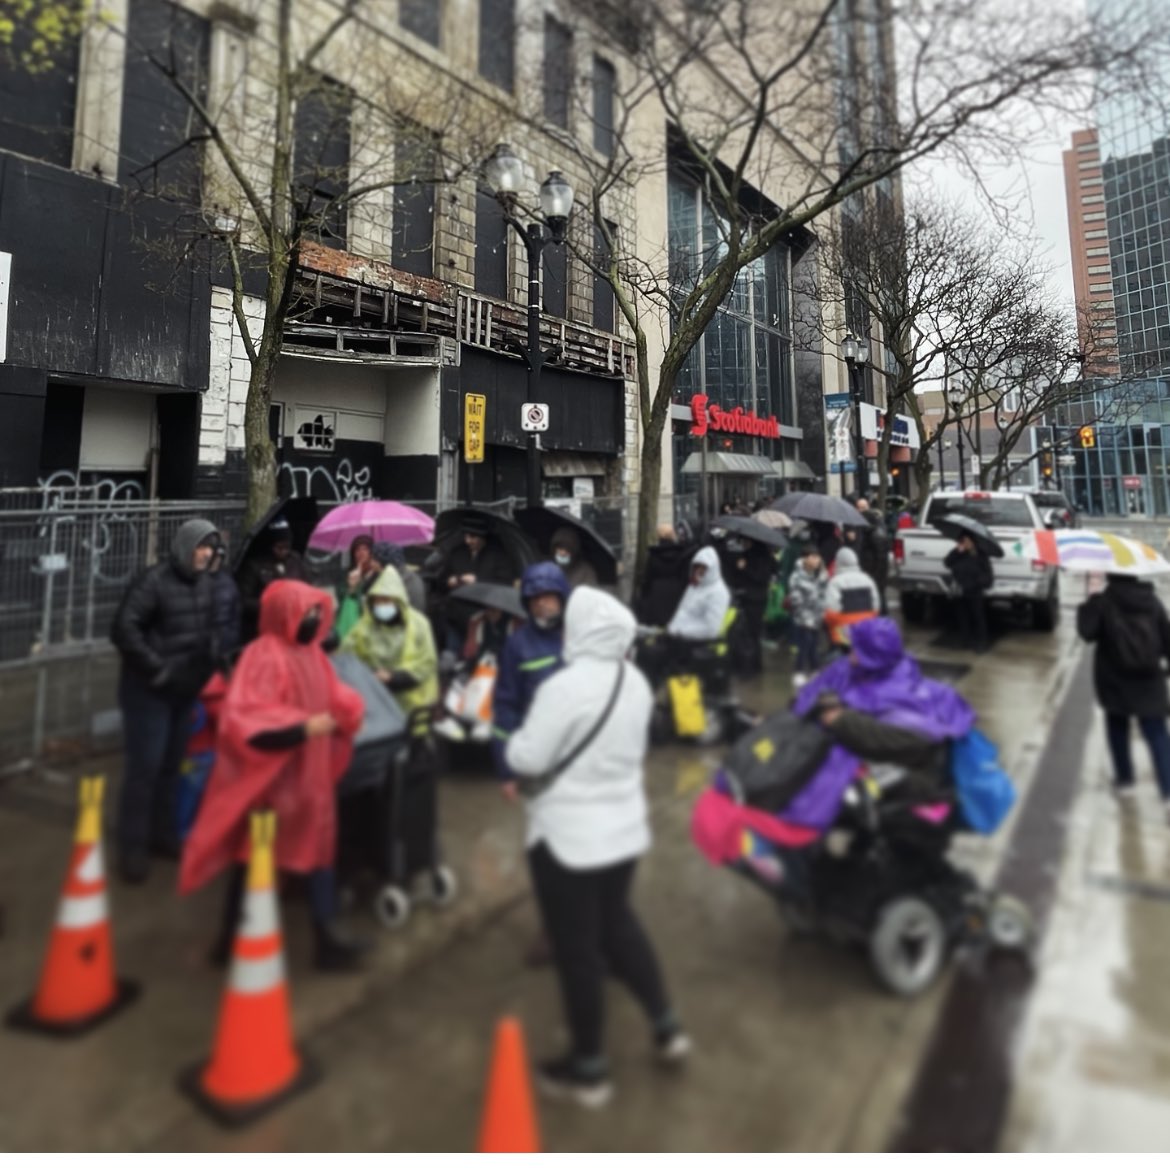 Even in the rain at Gore Park Line for people experiencing hunger and homelessness there is joy. A man in a wheelchair told me earnestly he found a quarter on street but it has teeth marks in it. He then burst into a big smile and told me it's 'Bitcoin' #HamOnt #Onpoli #cdnpoli